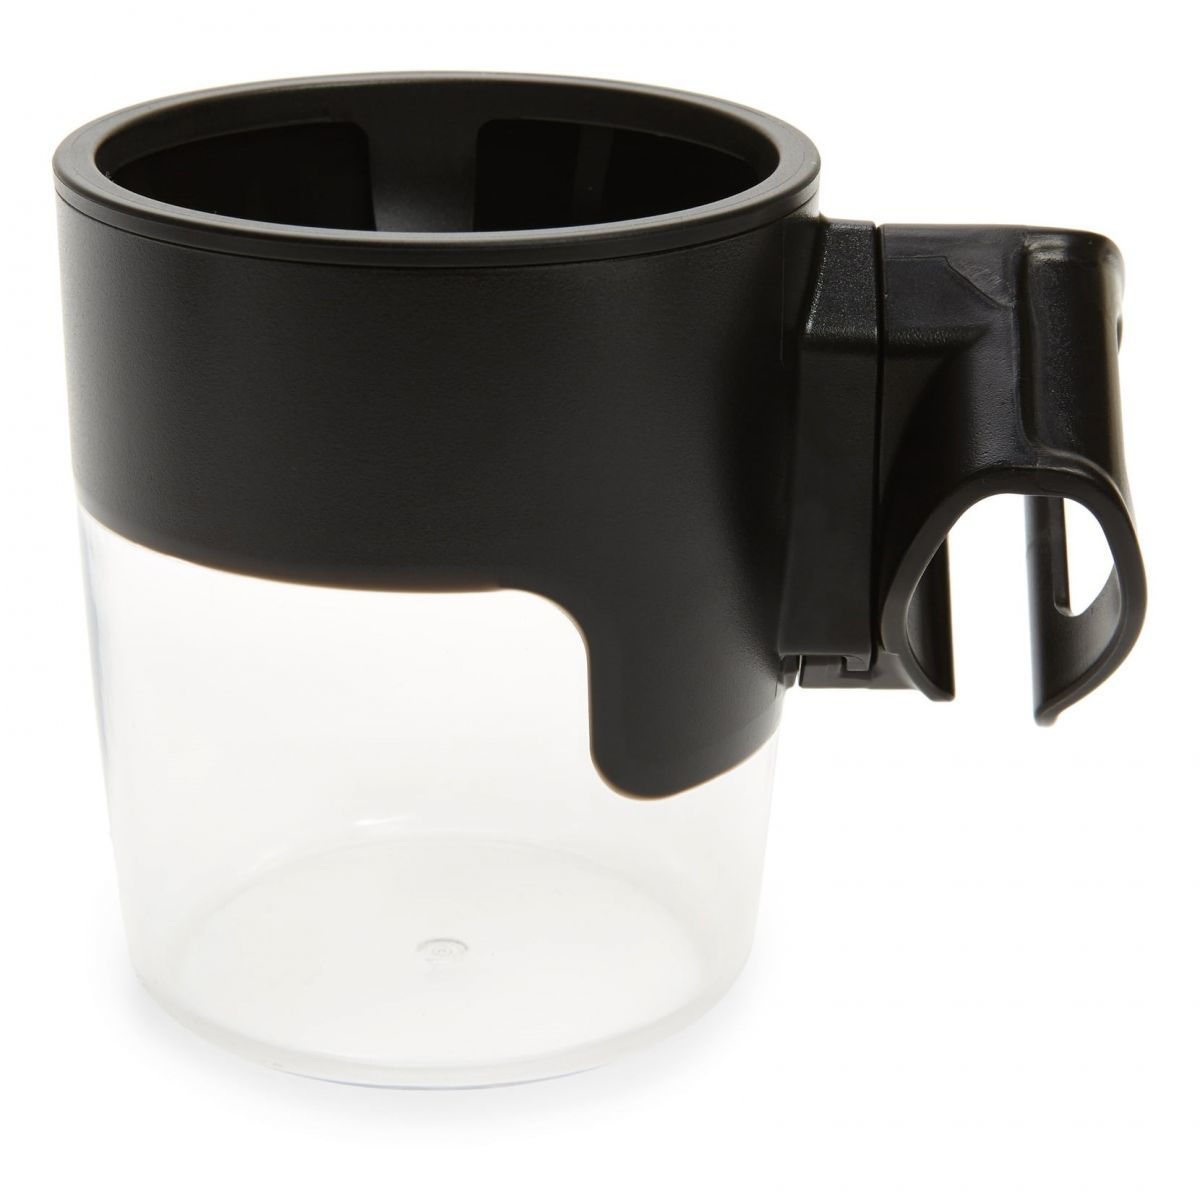 Clip-On Cup Holder